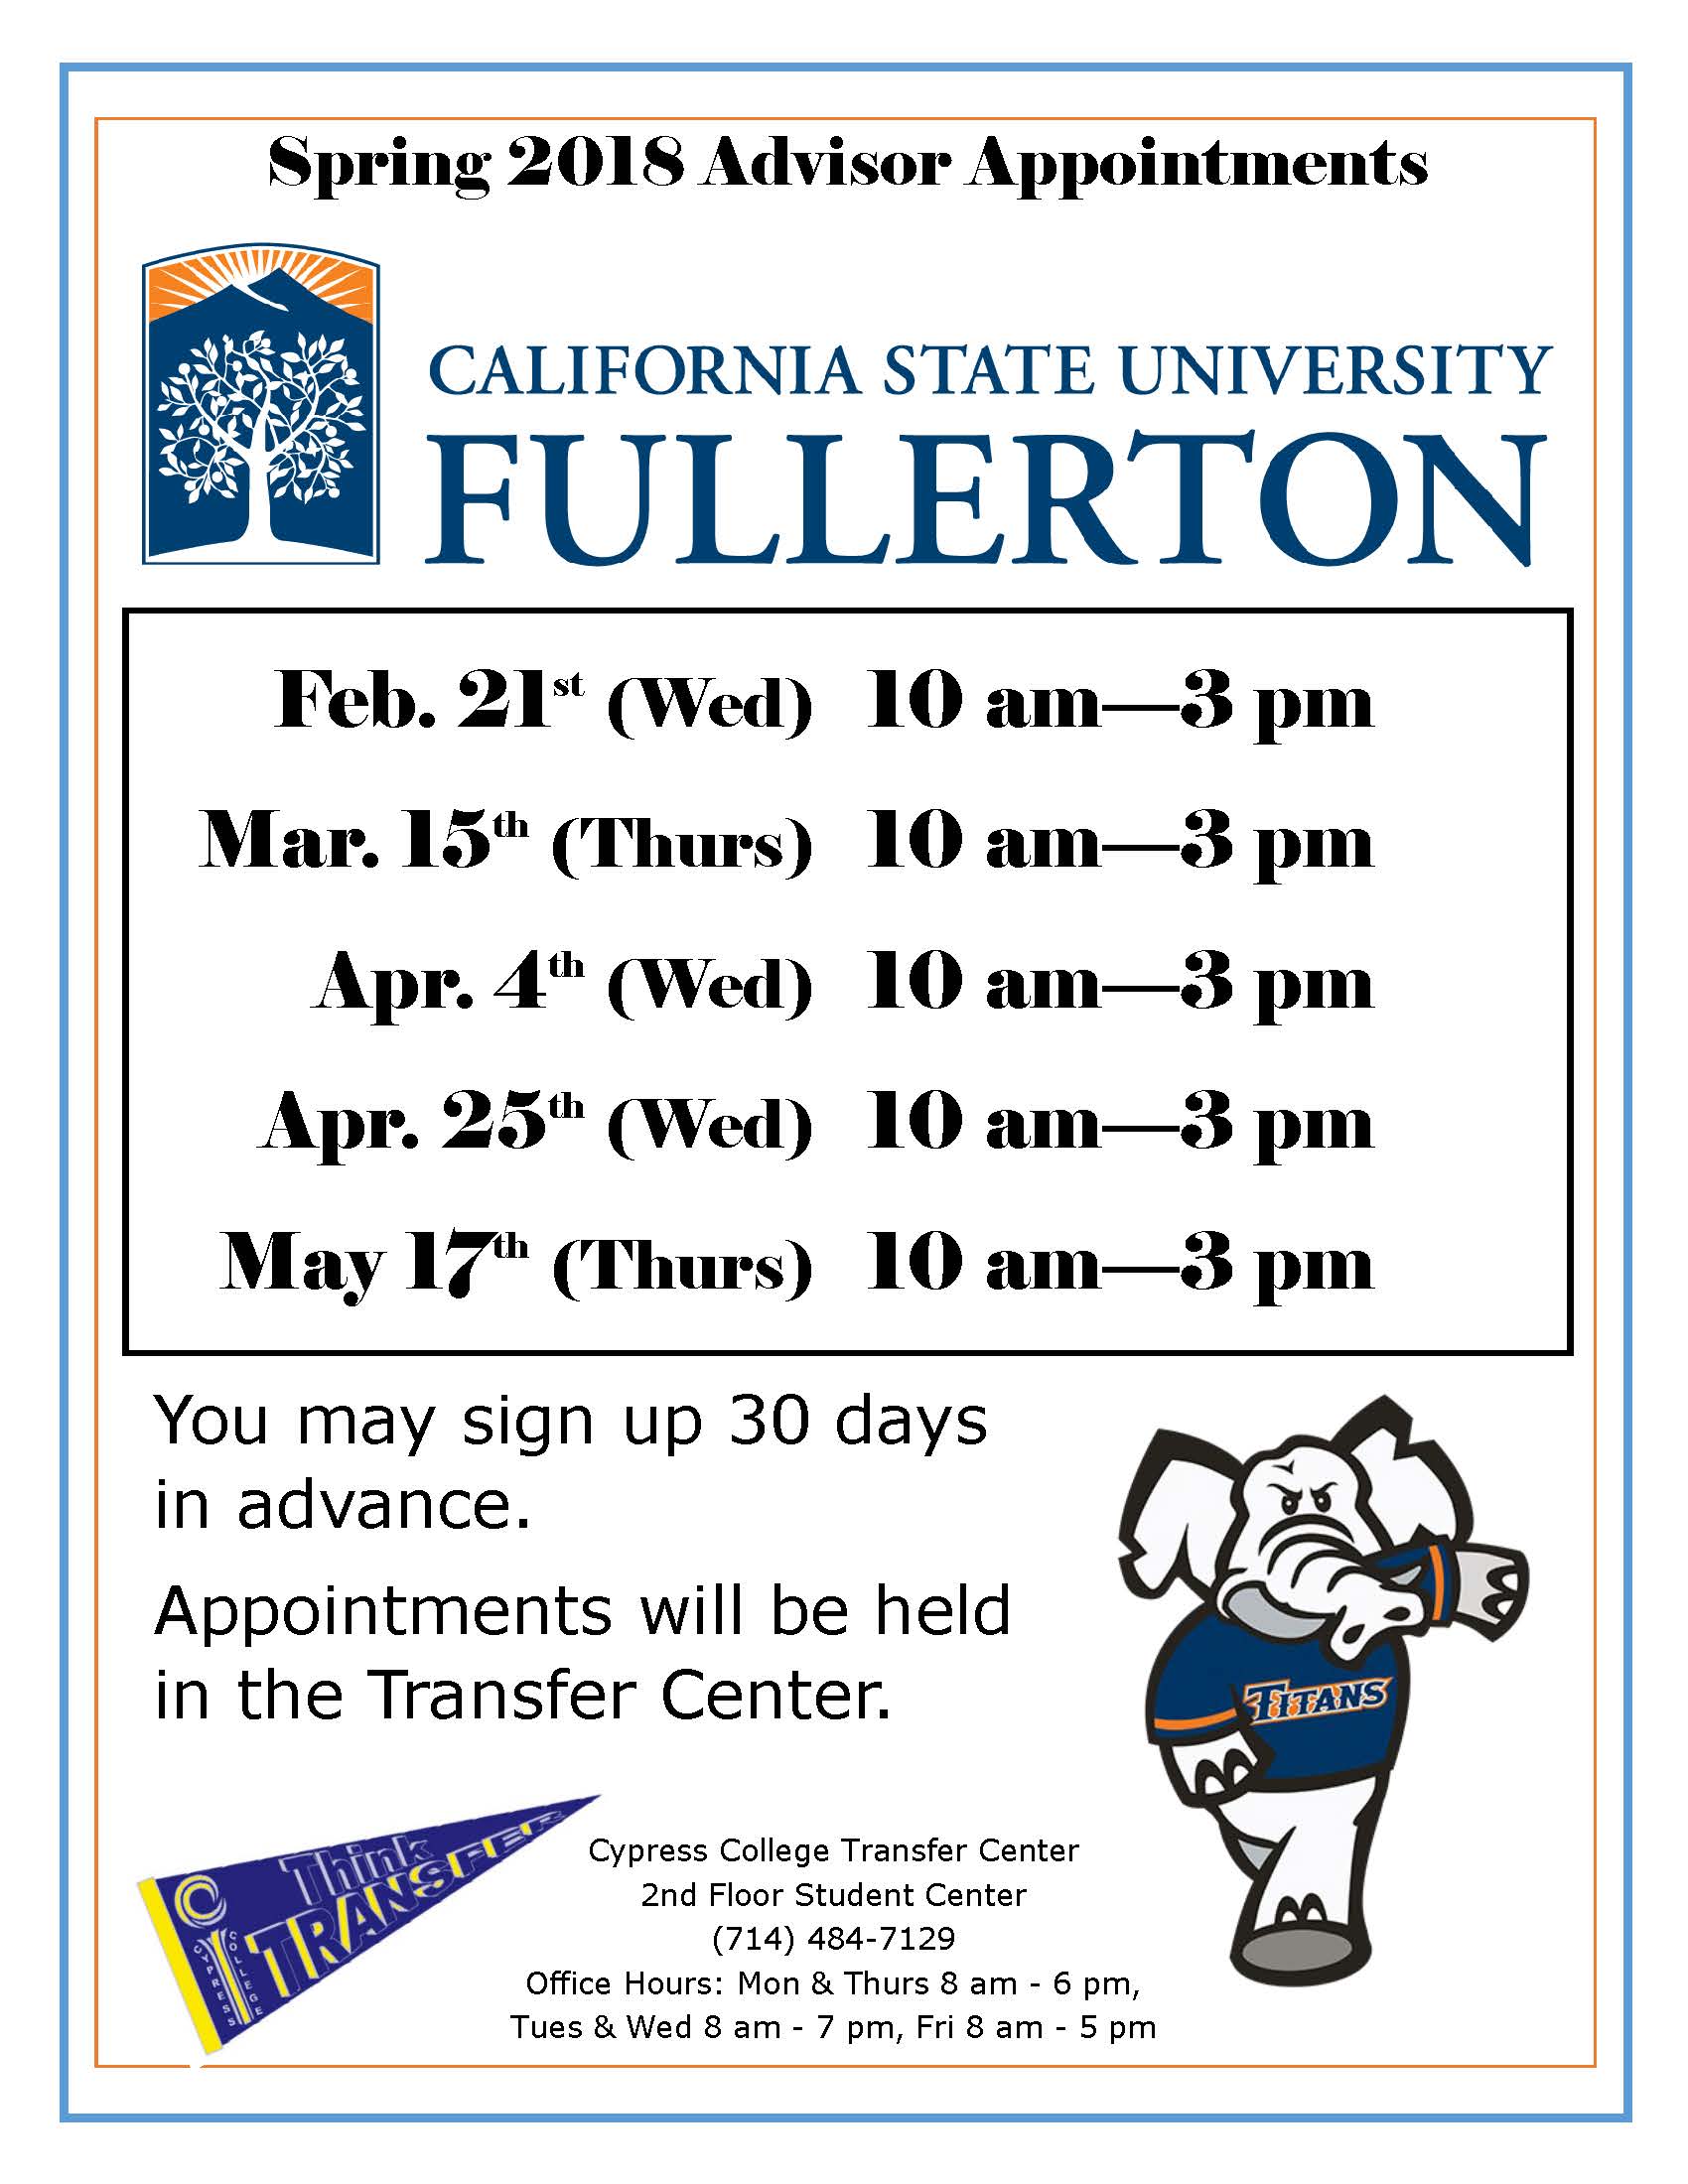 Cal State Fullerton Spring 2018 Advisor Appointments flyer